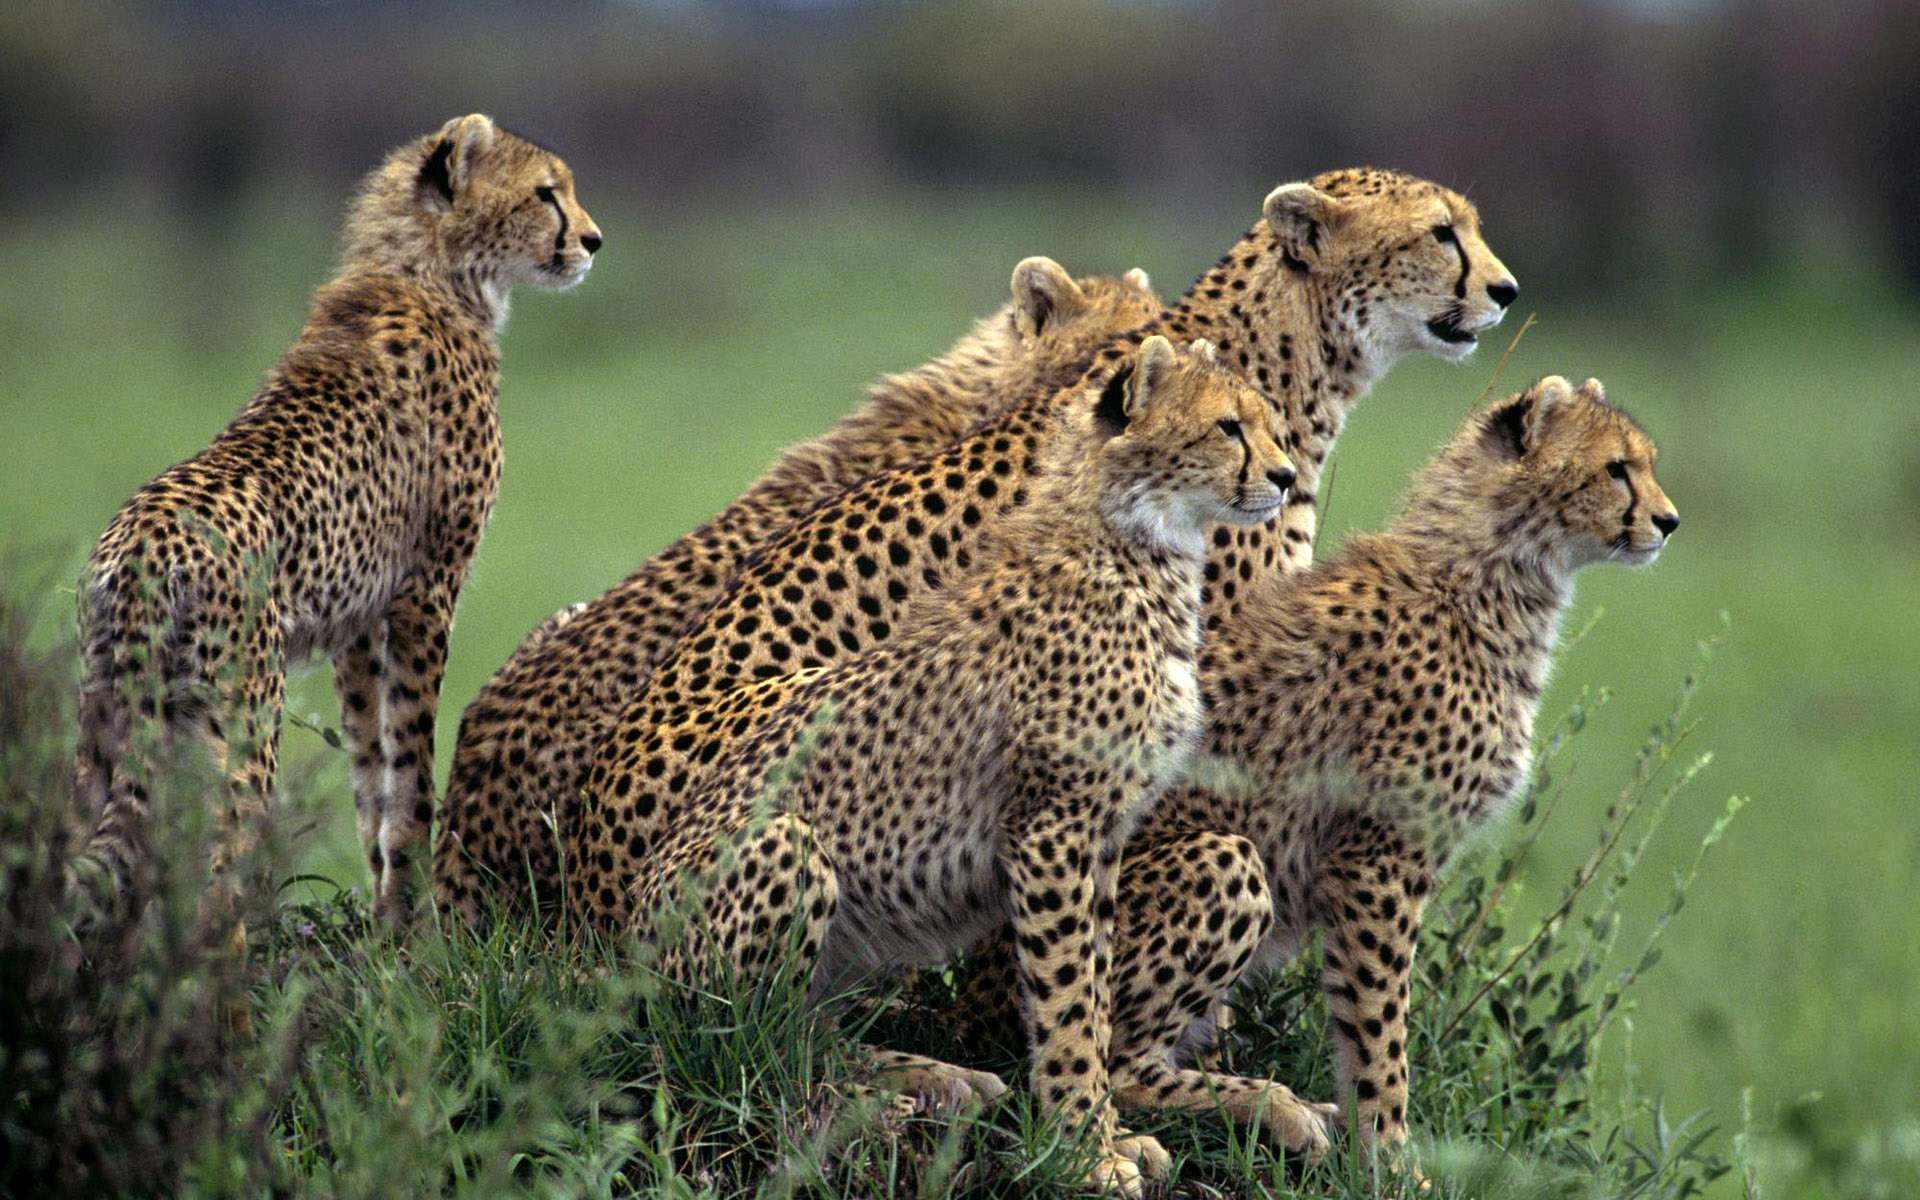 Cheetah HD wallpapers, Wild and untamed, Stunning backgrounds, Majestic animal photography, 1920x1200 HD Desktop